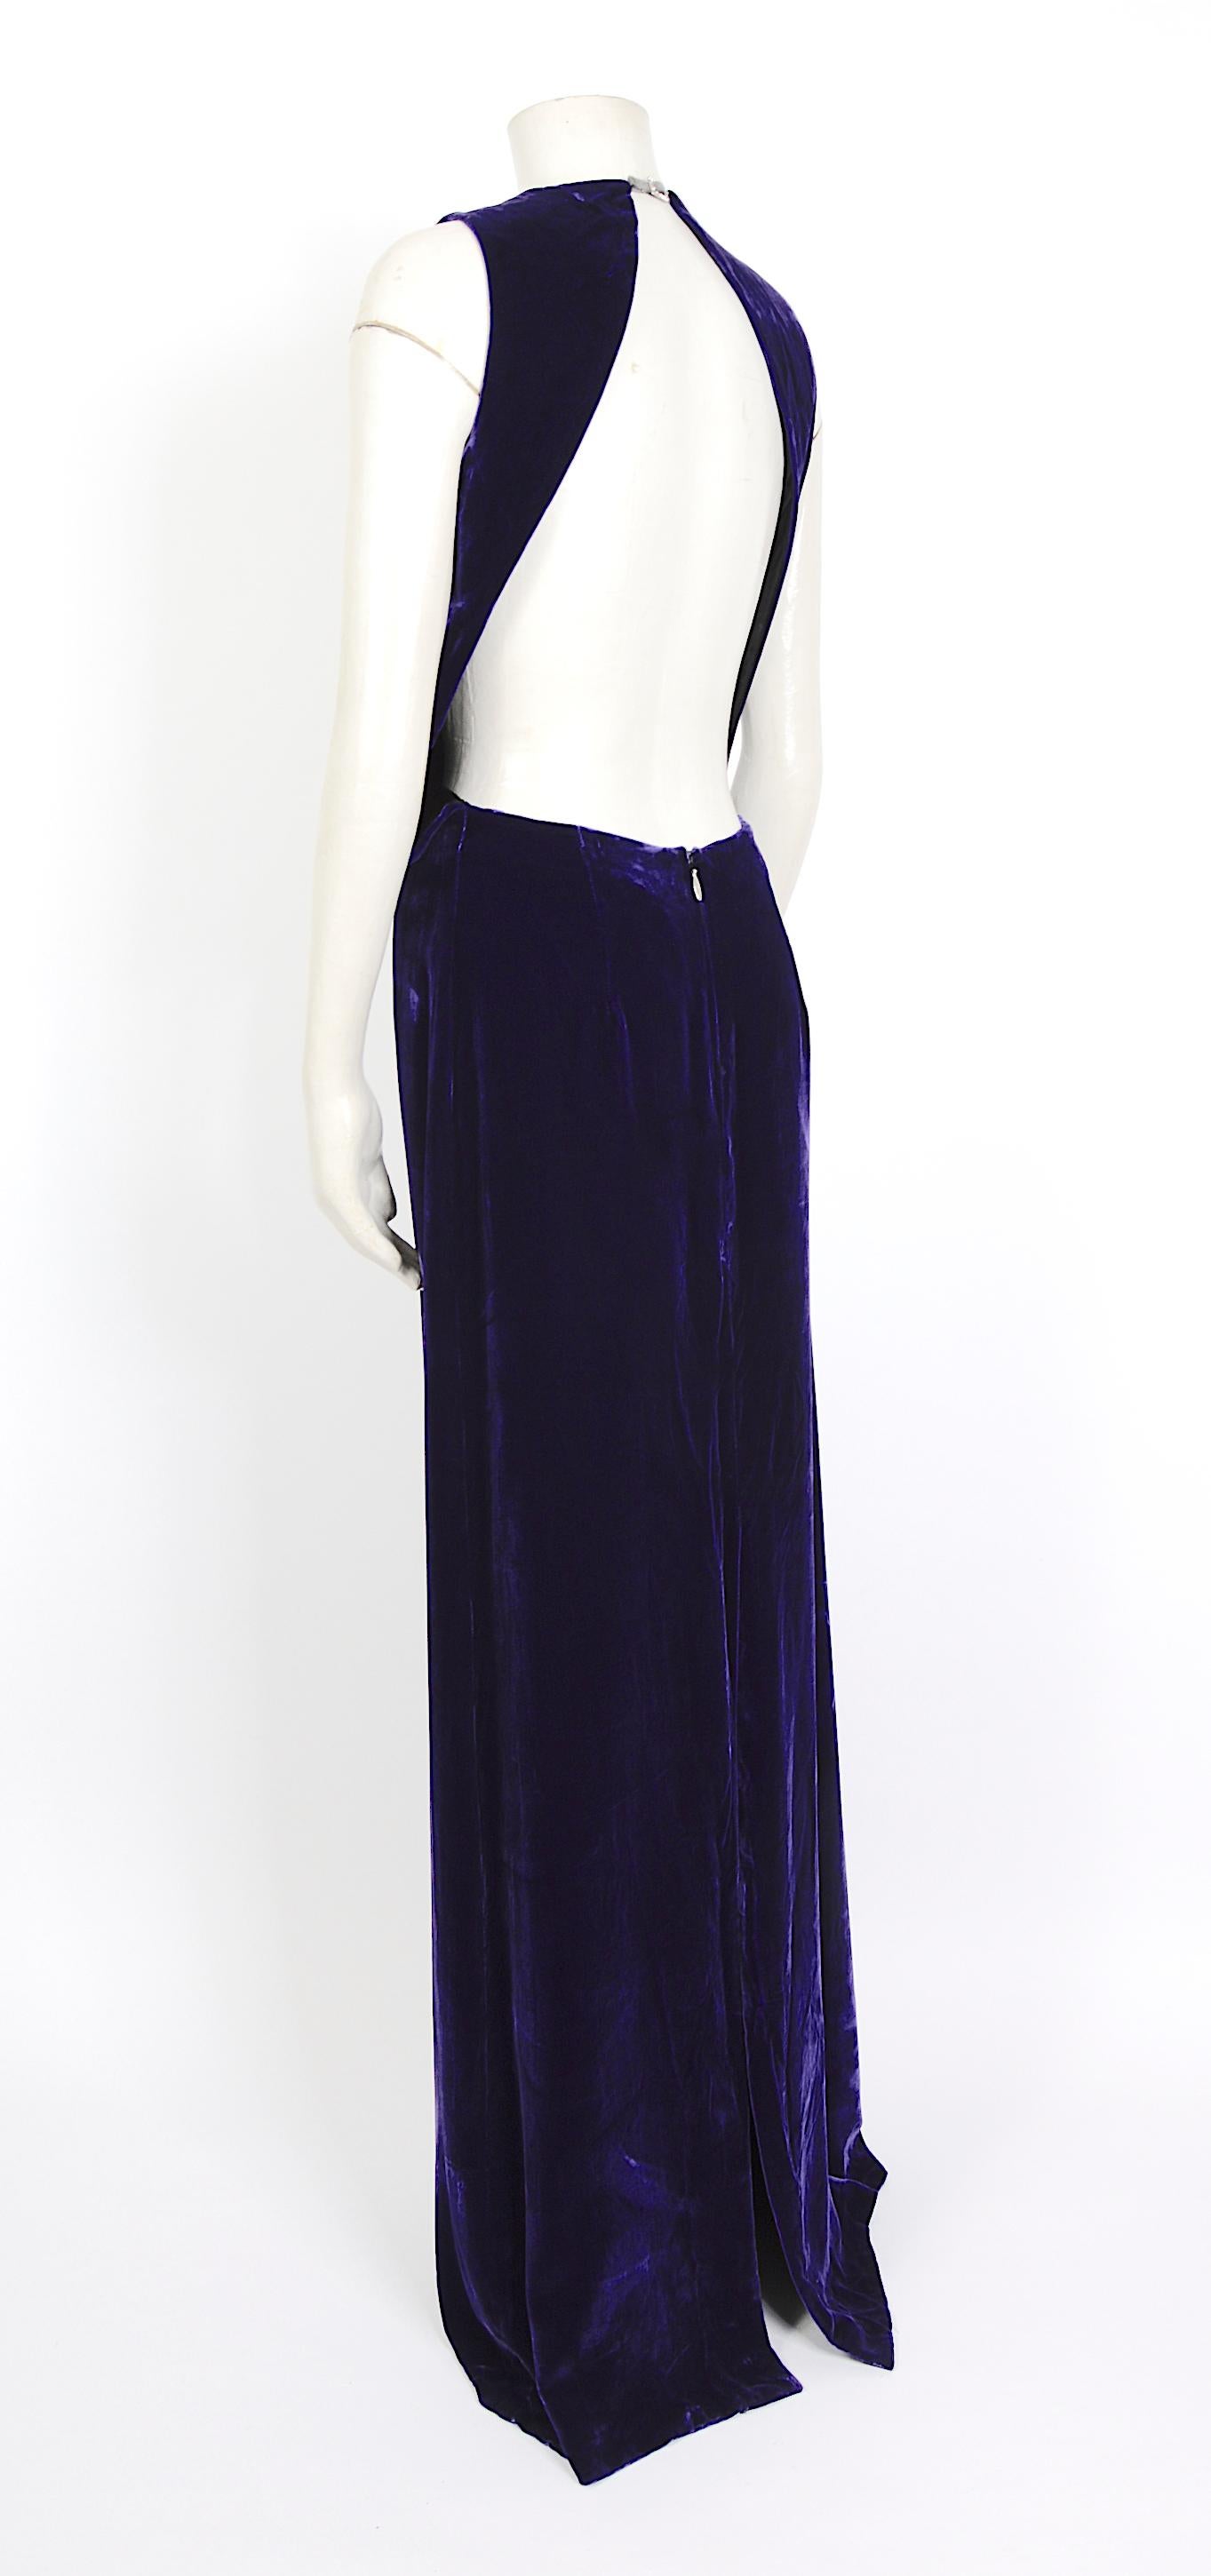 Versace Versus vintage early 2000 open back purple crushed velvet long dress.
The fabric, deep violet crushed silk velvet (mix 75% viscose 25% silk) of this dress is beautiful and soft. The front panel is folded at the waist. The dress is fully